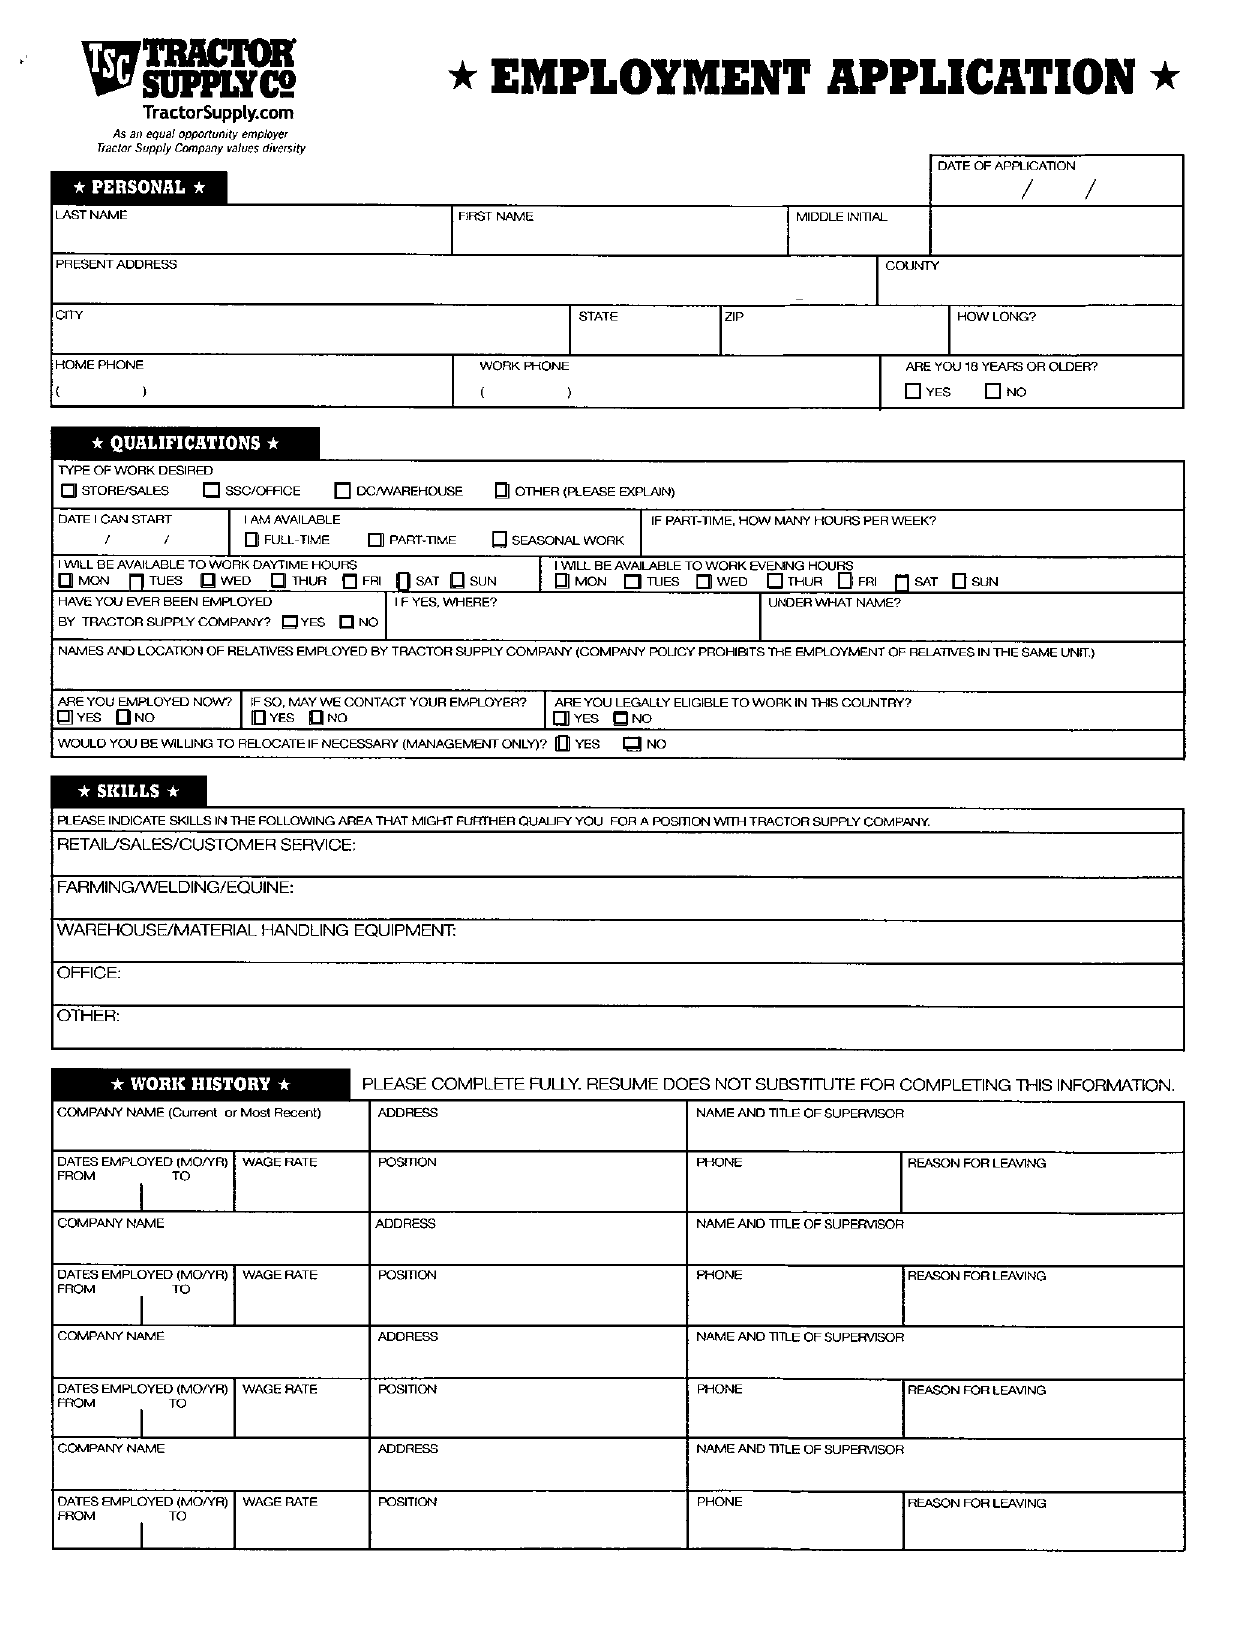 Download Tractor Supply Job Application Form Careers PDF 